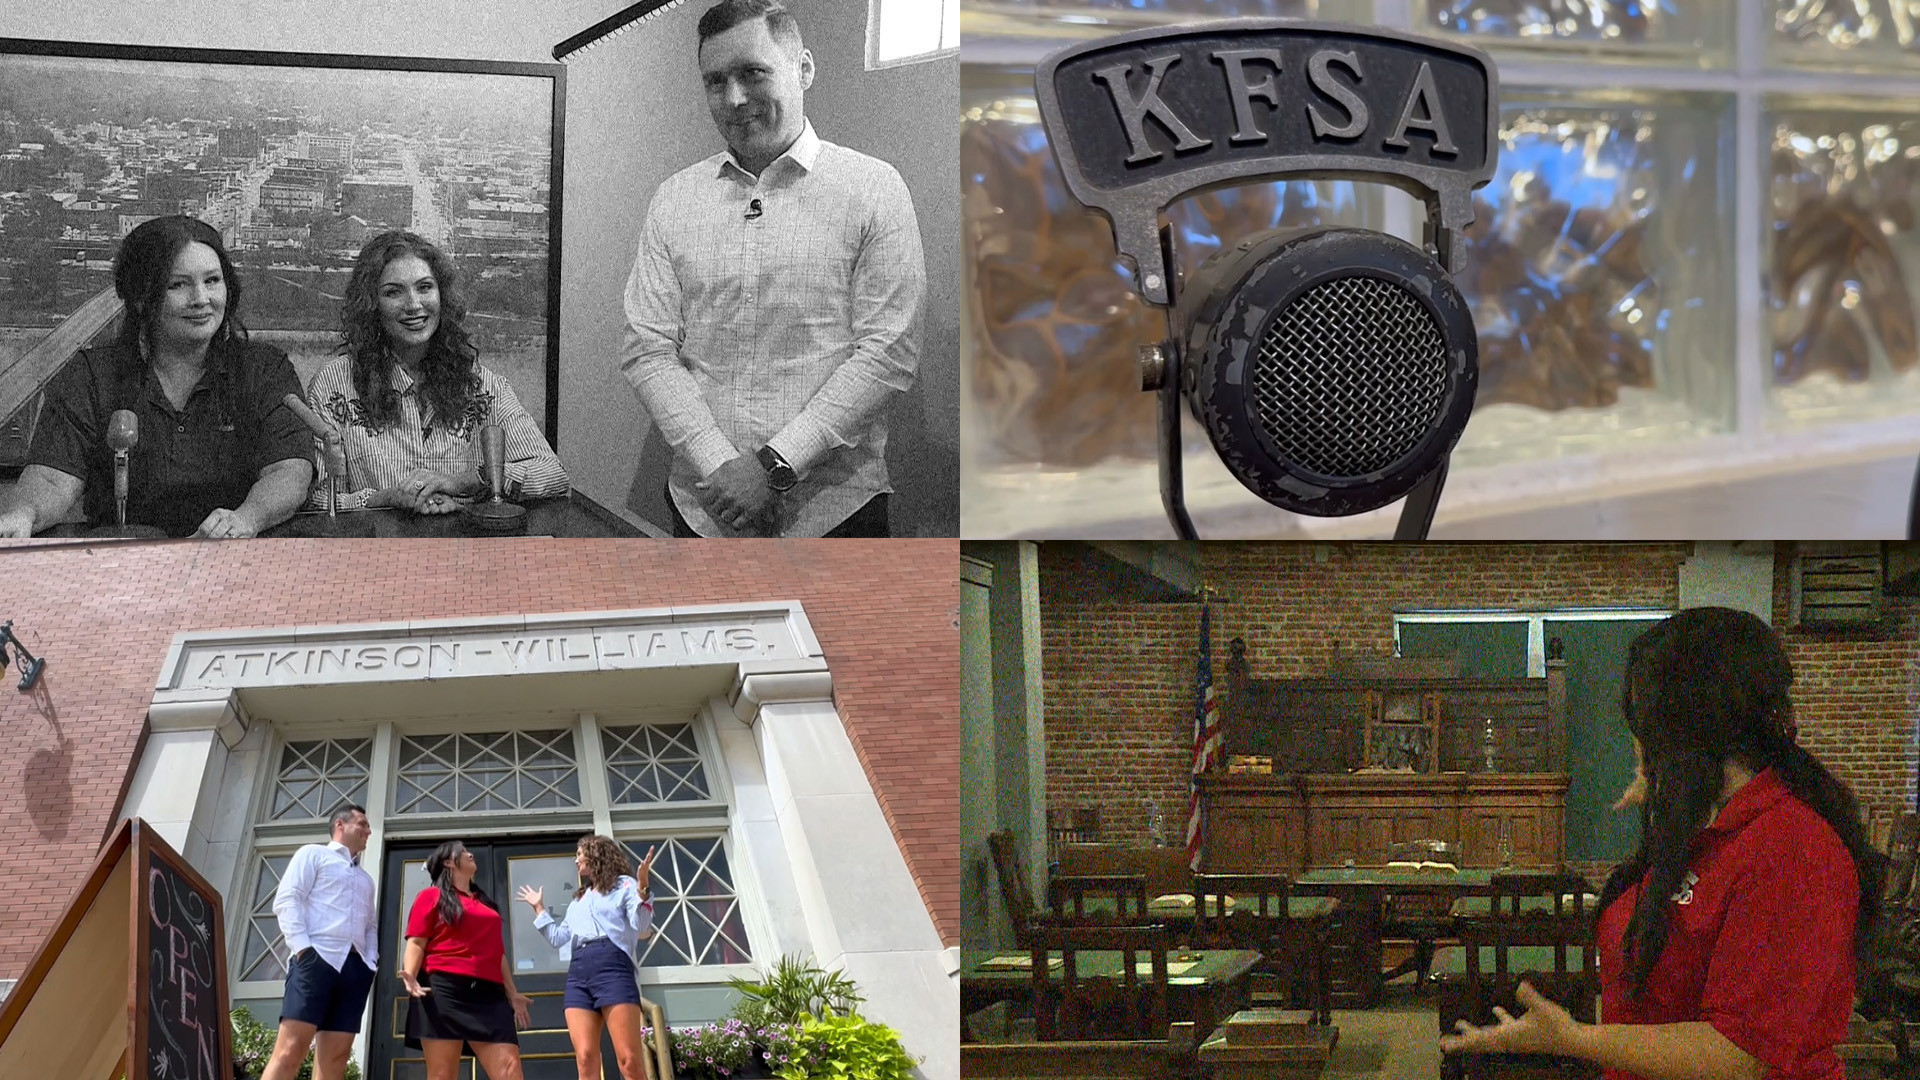 On this episode of Around the Corner, the 5NEWS morning crew embraced their past by reporting from the old KFSM news set at the Fort Smith Museum of History.